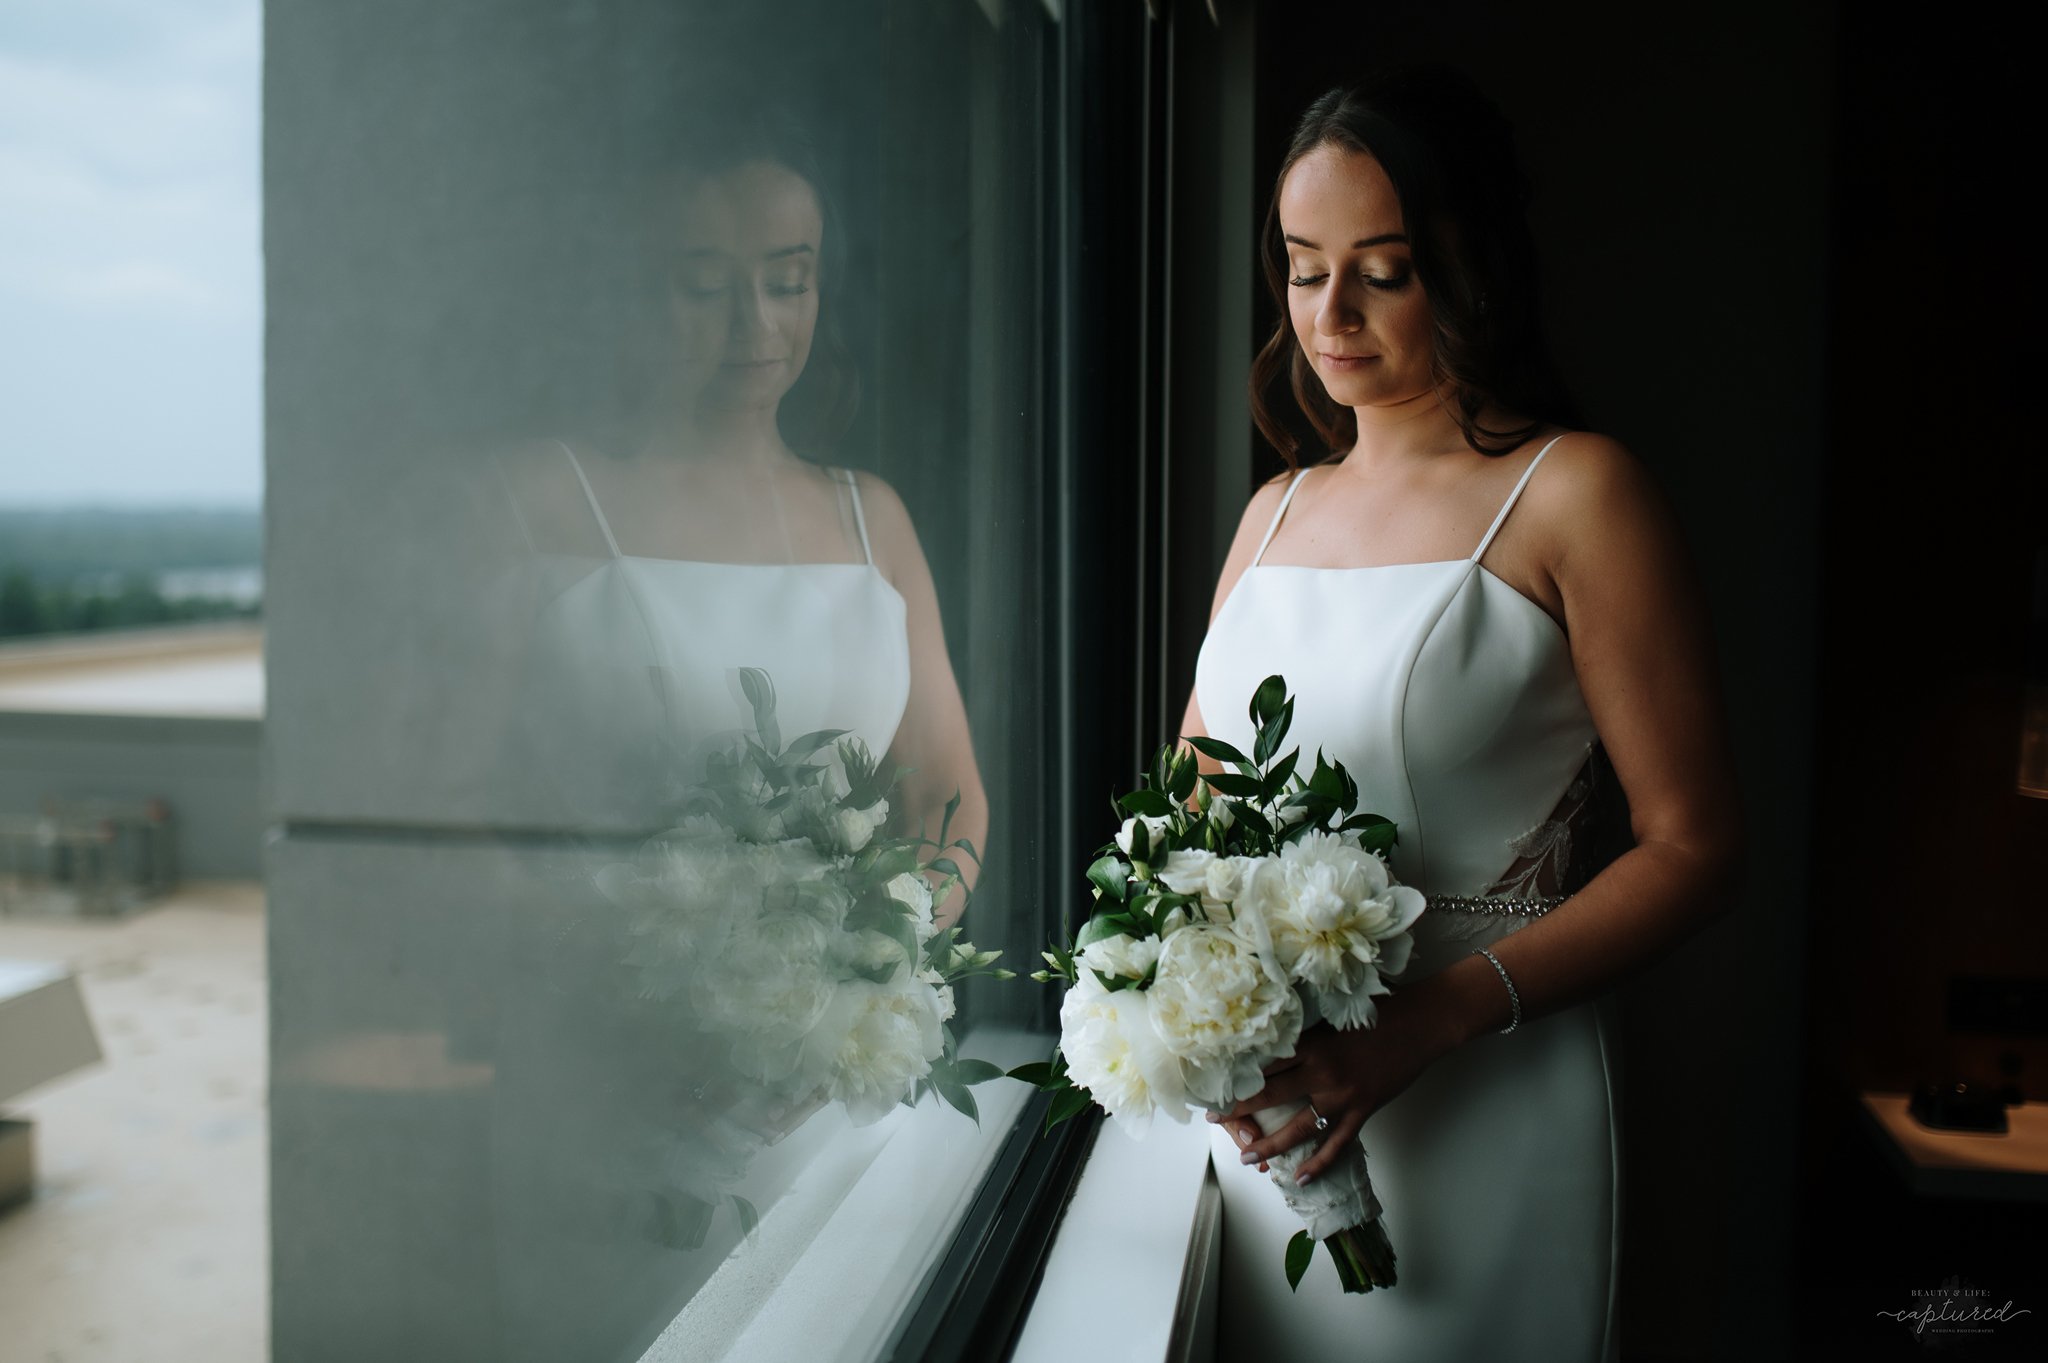 Beauty_and_Life_Captured_Felicia_Rodrigues_Wedding_test-38.jpg